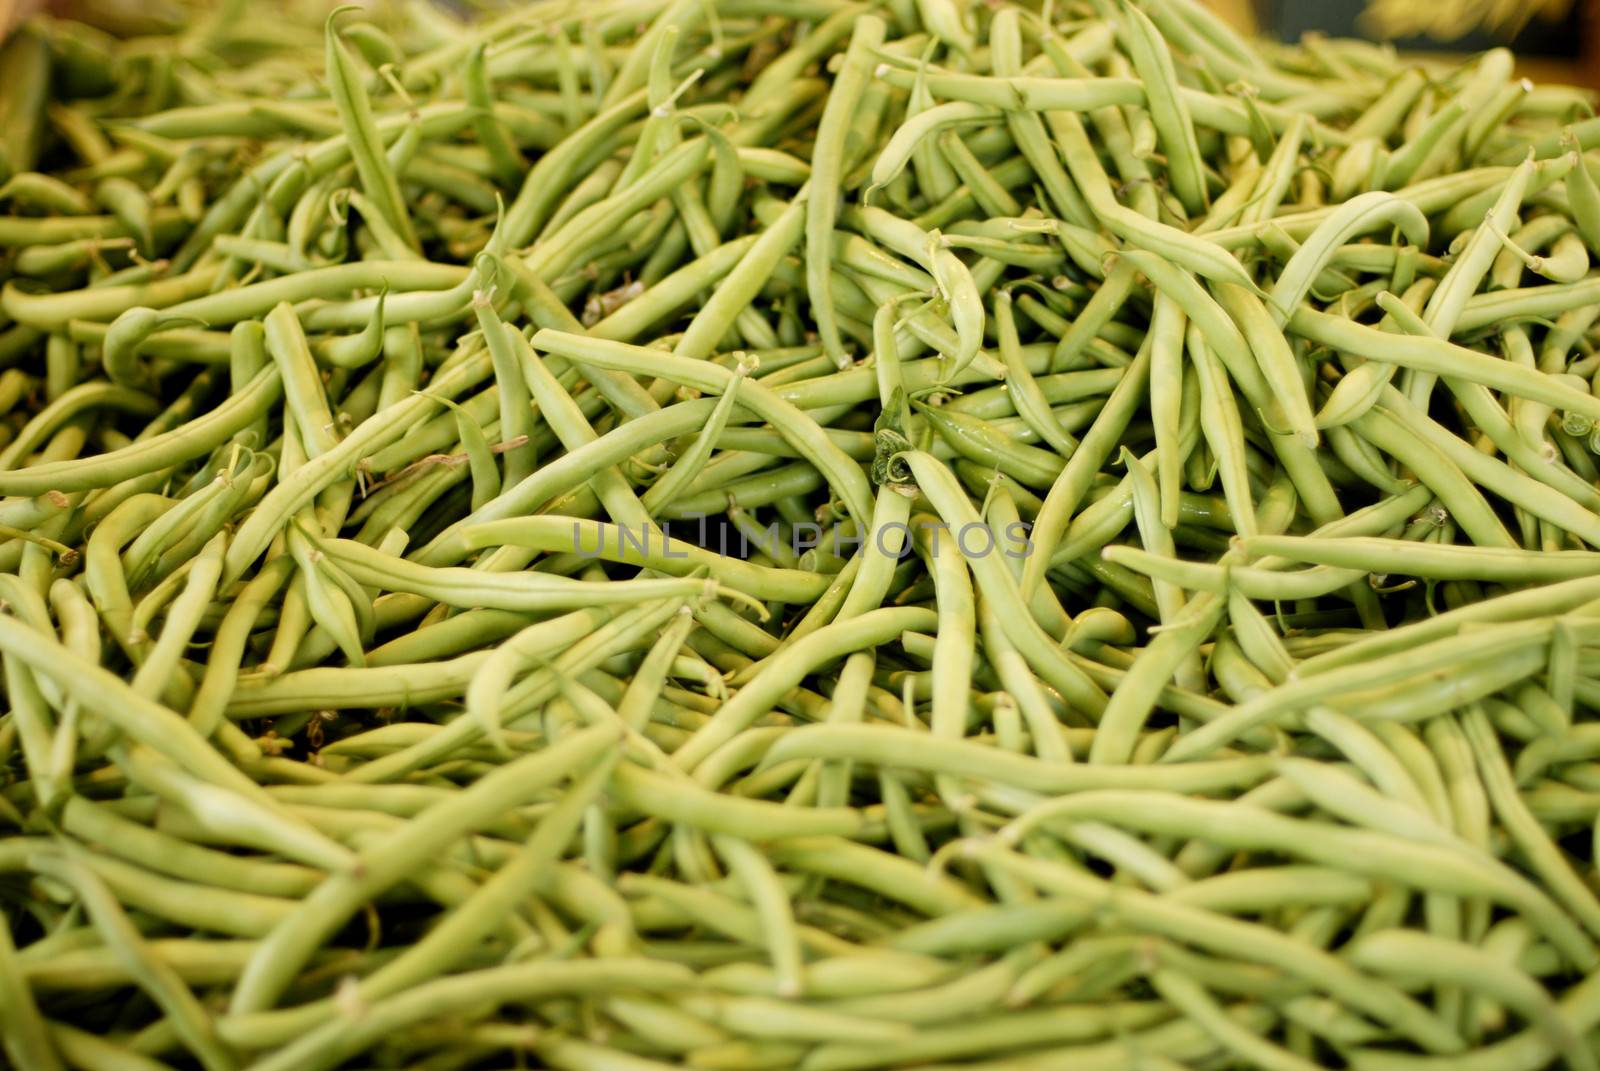 Large pile of french beans on the local market